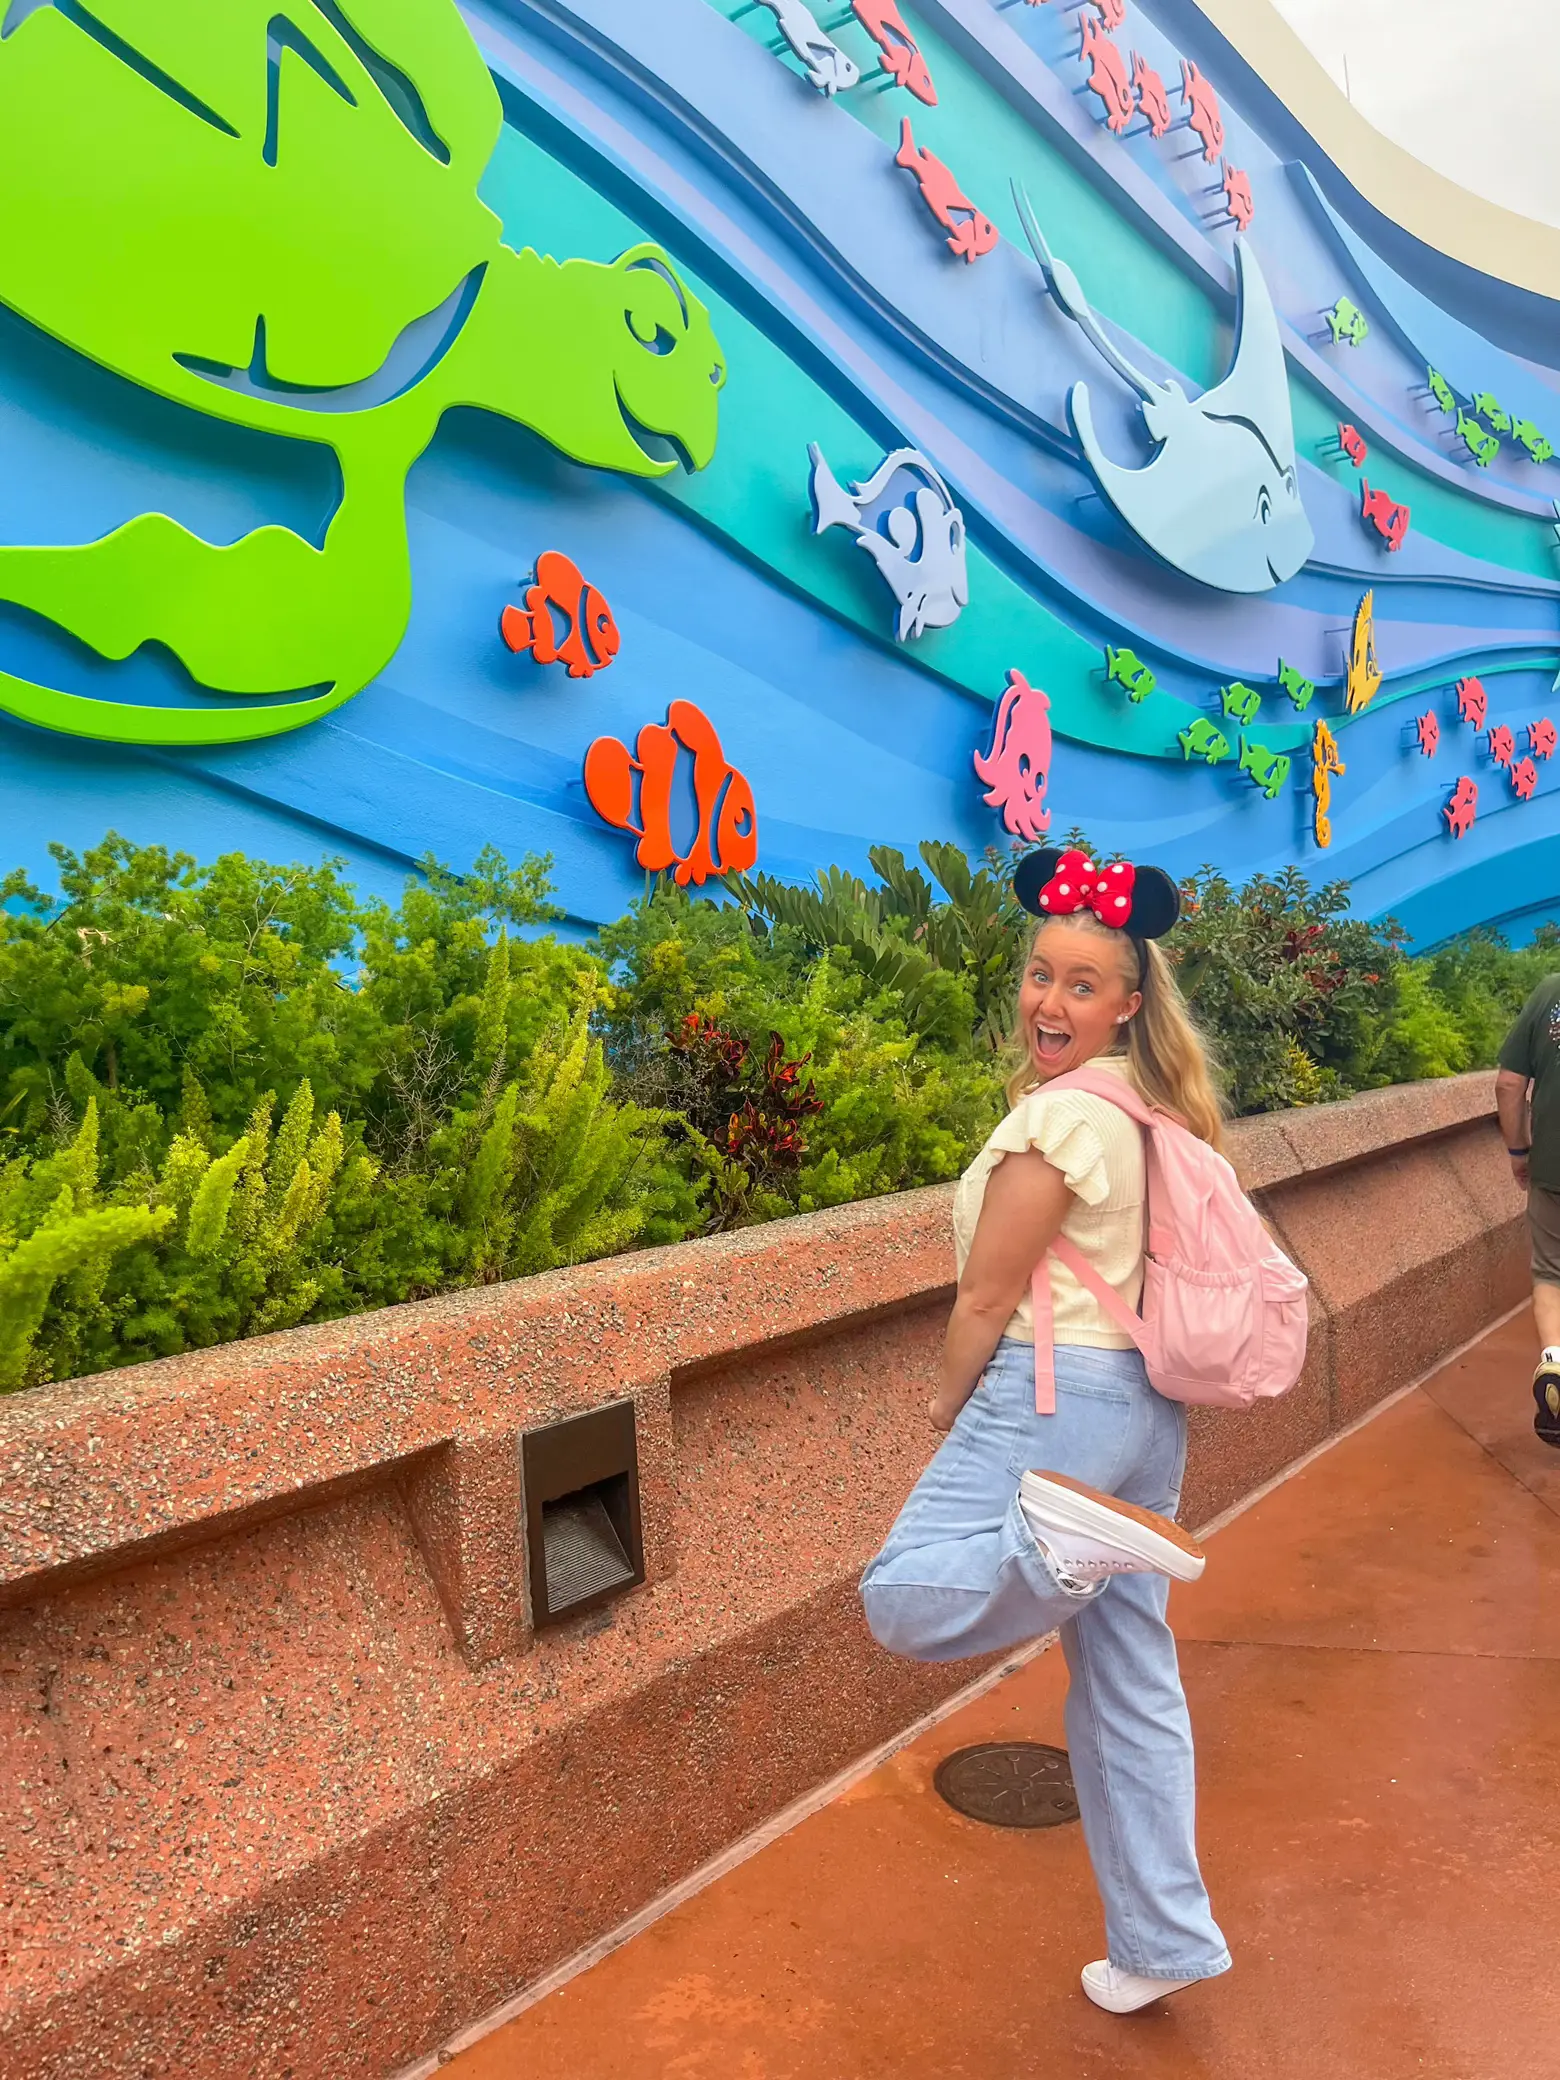  A woman wearing a white shirt and blue jeans is standing in front of a colorful fish wall. She is holding a frisbee and appears to be enjoying her time at the aquarium.